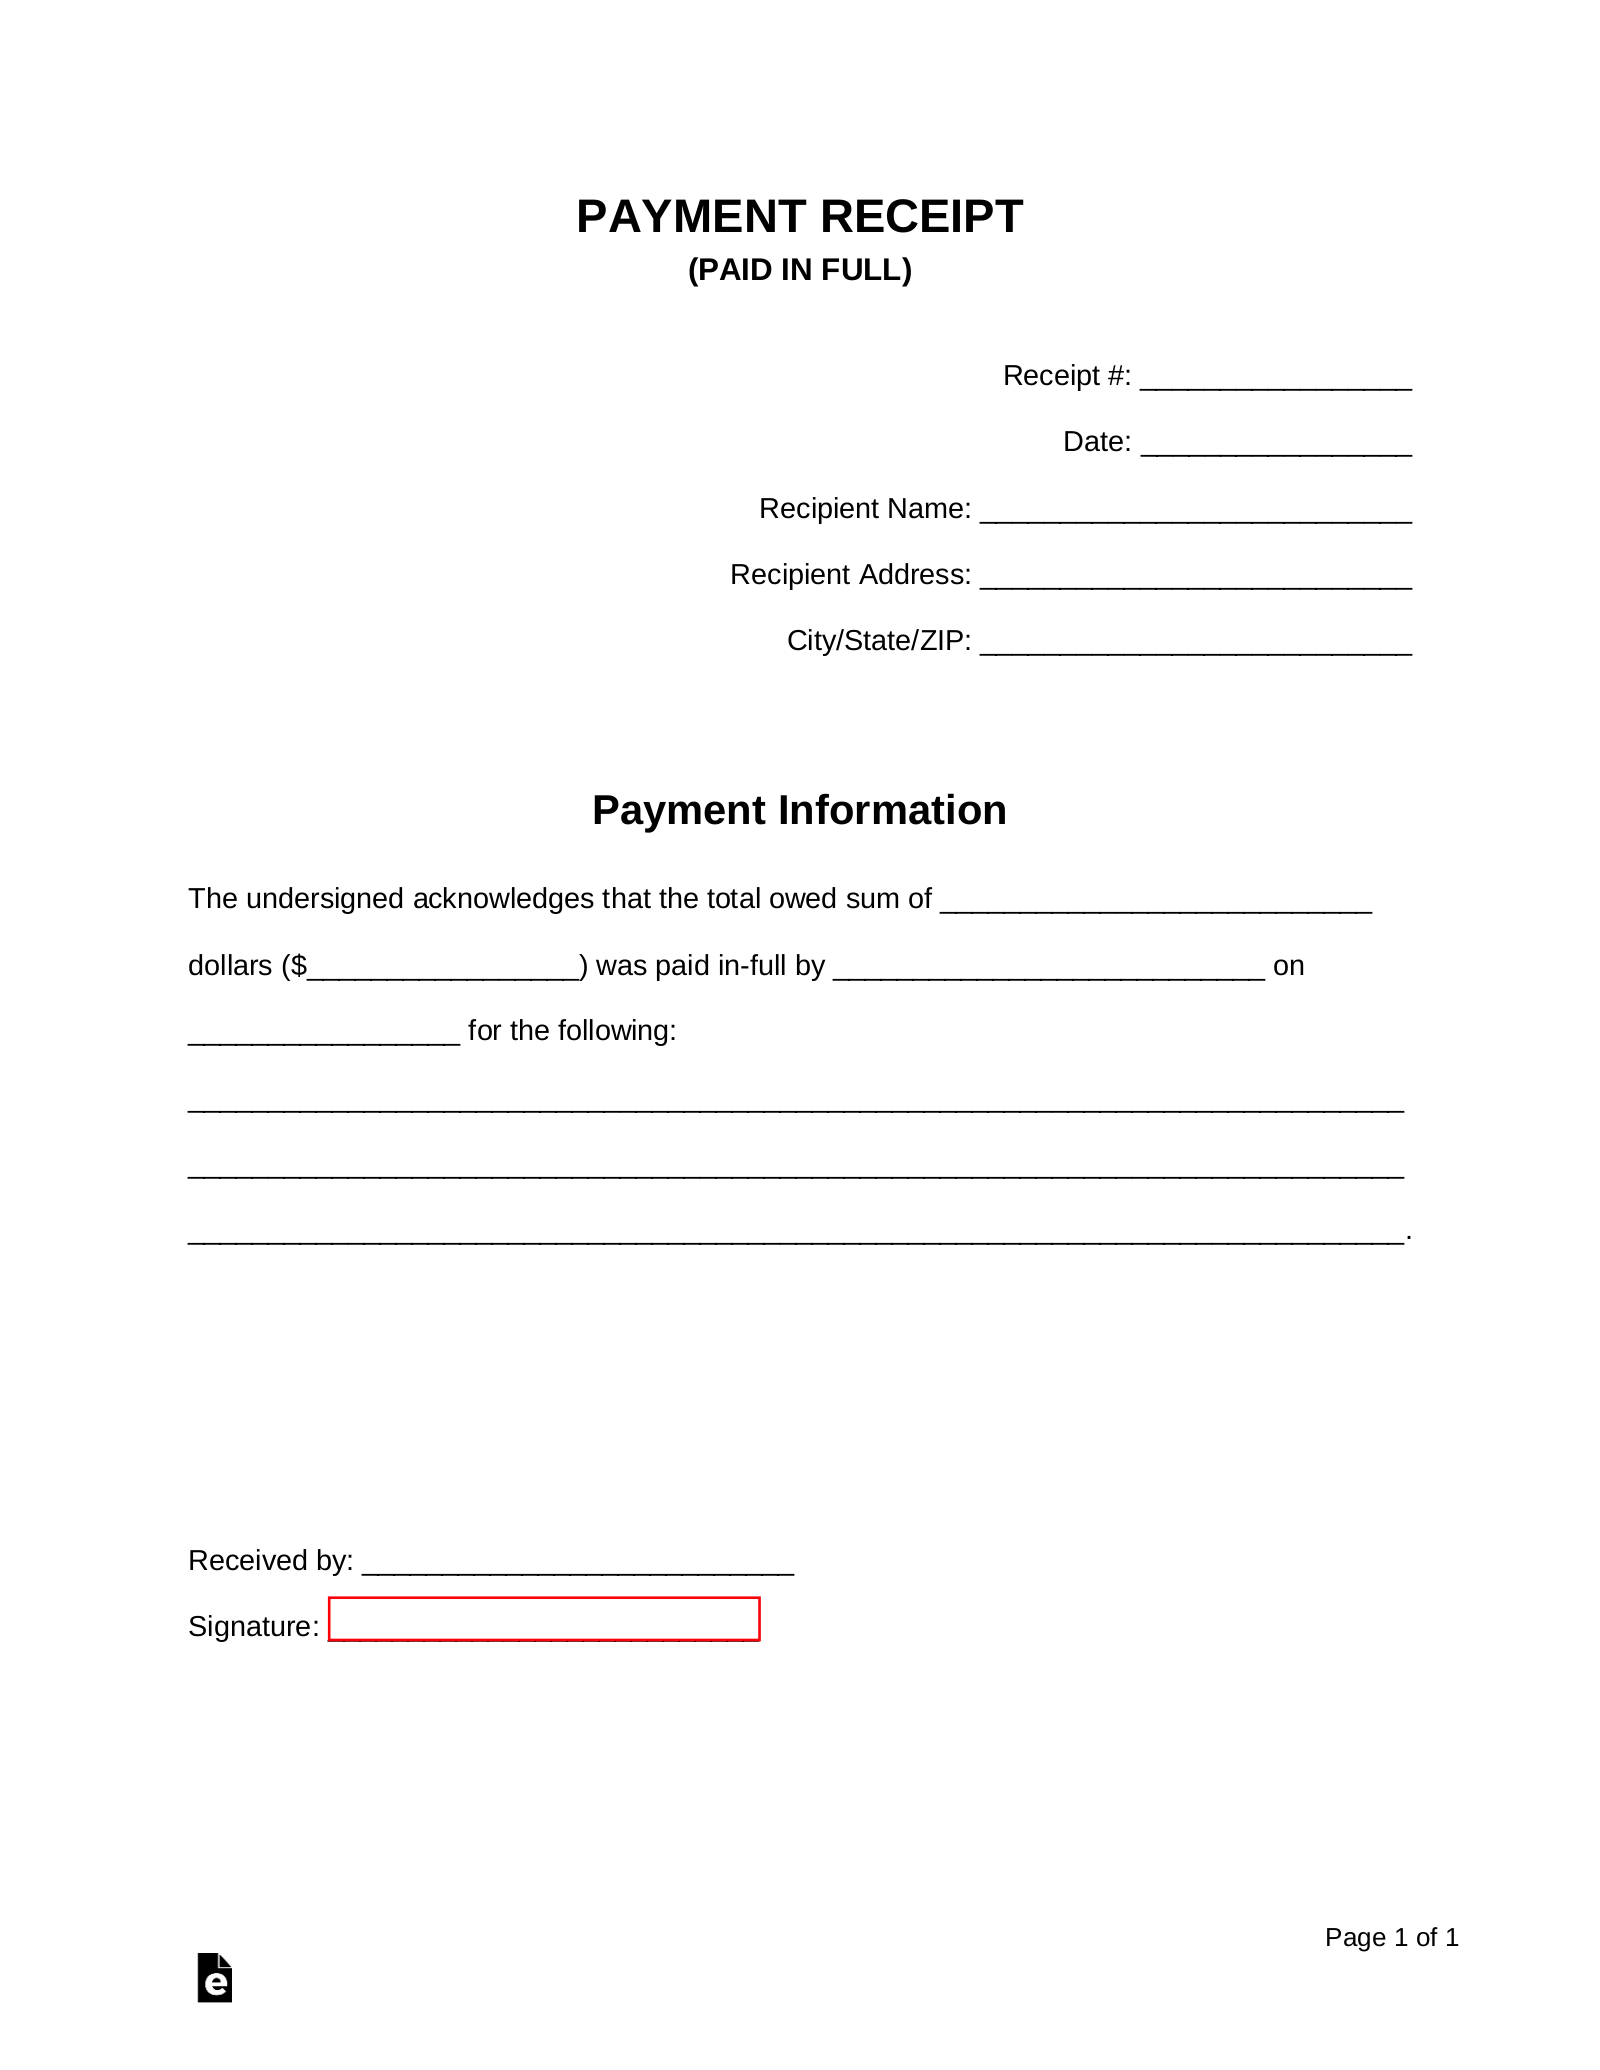 Receipt Format For Payment Received from eforms.com